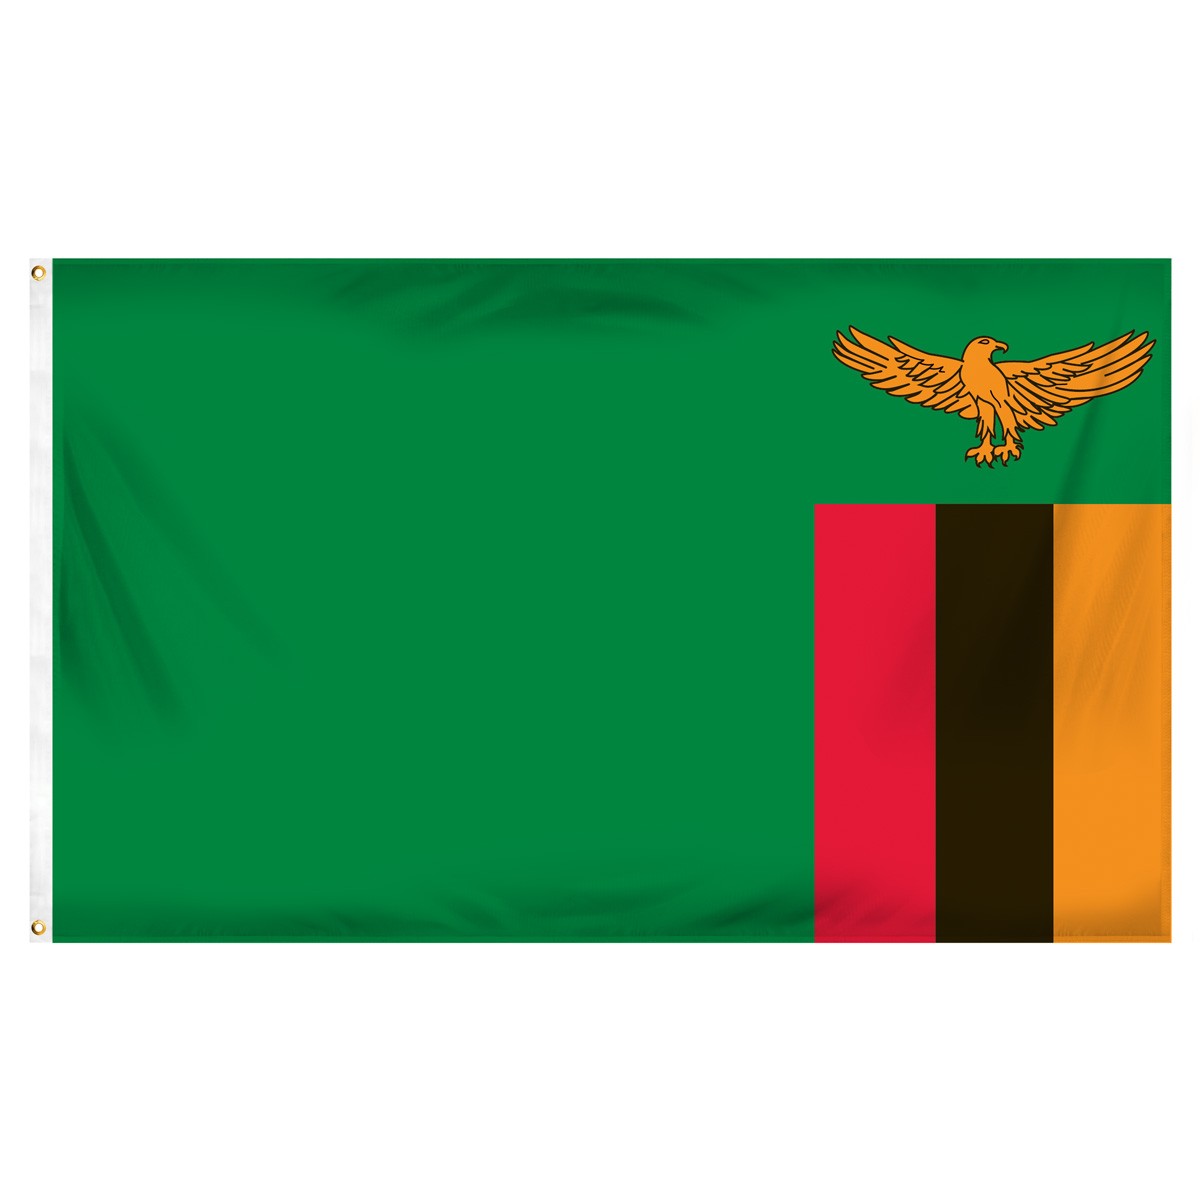 Zambia Posters and Banners